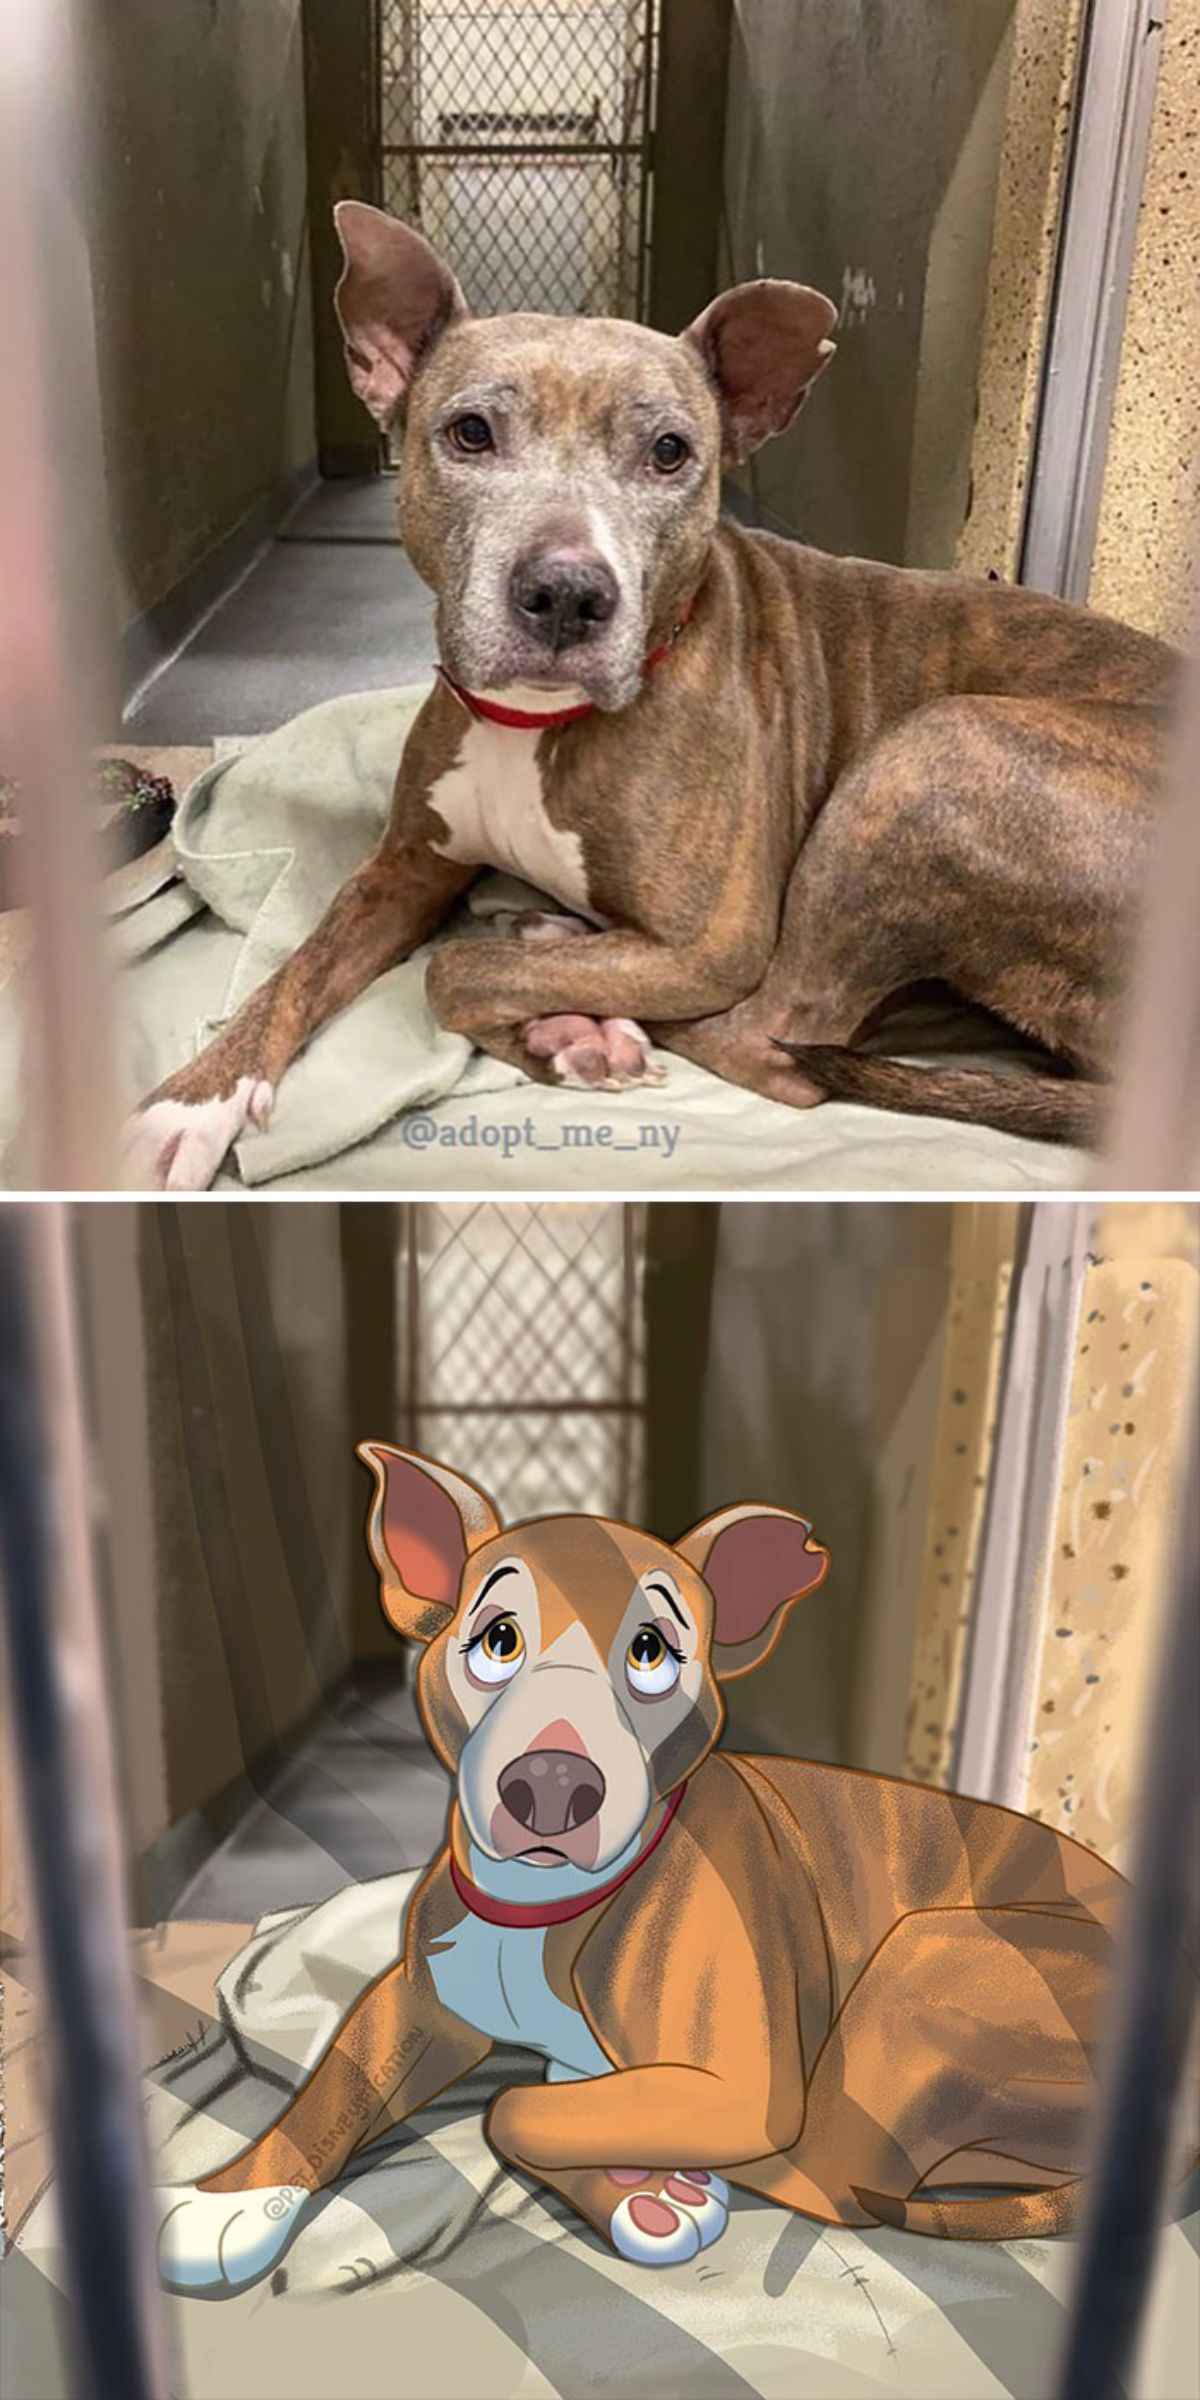 real photo and cartoon image of a brown and white dog laying on a grene blanket in a shelter room